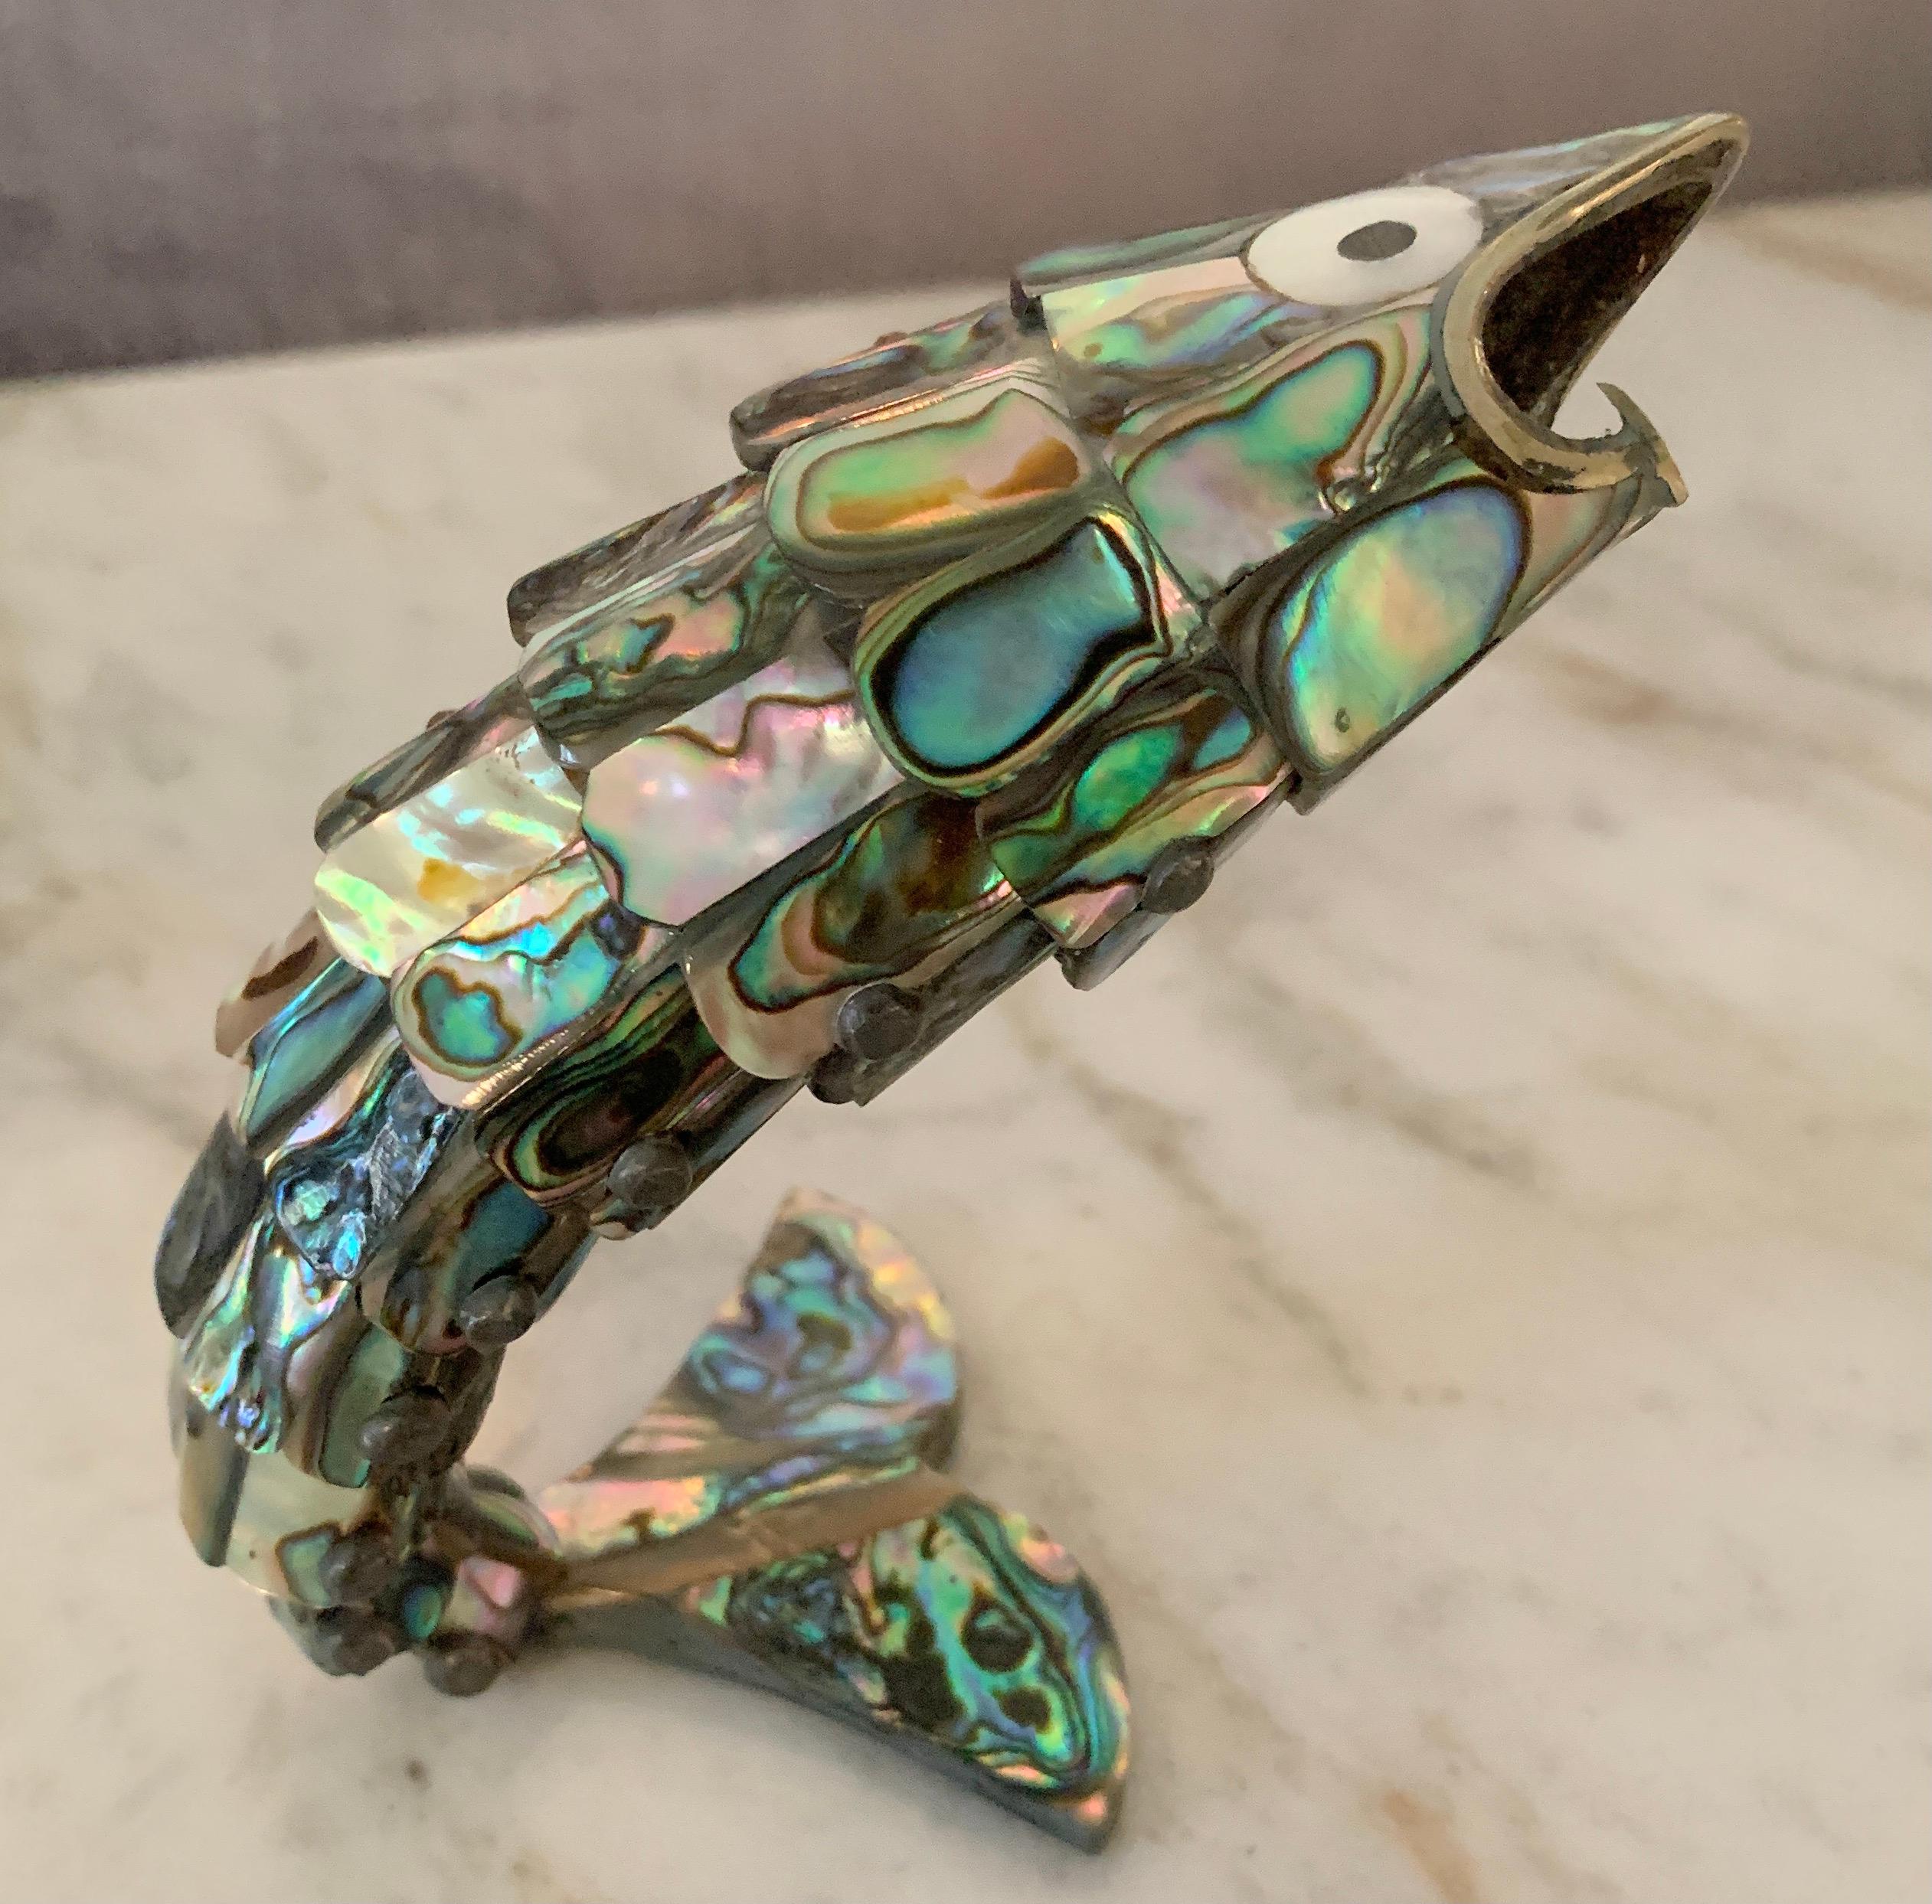 A wonderful mid century bottle opener in the style of Los Castillo. The opener is an iconic design and a compliment to any bar or kitchen counter. The piece can rest standing up on it's tail.